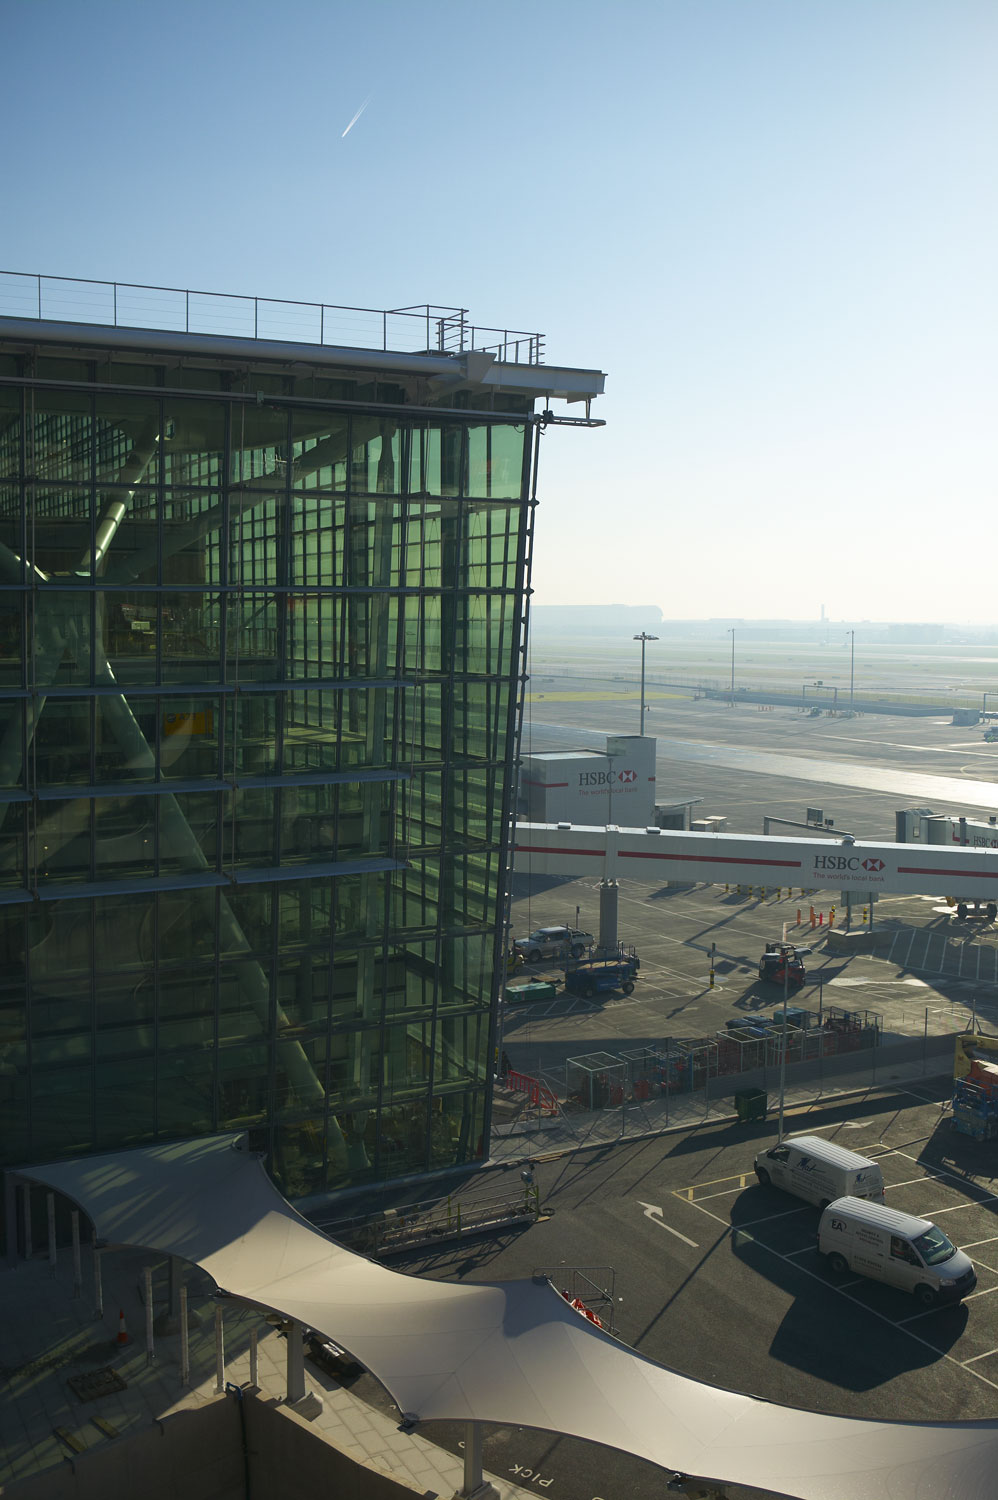 Heathrow Airport Terminal 5 glazed facade and apron at dawn | Architectural Photographer